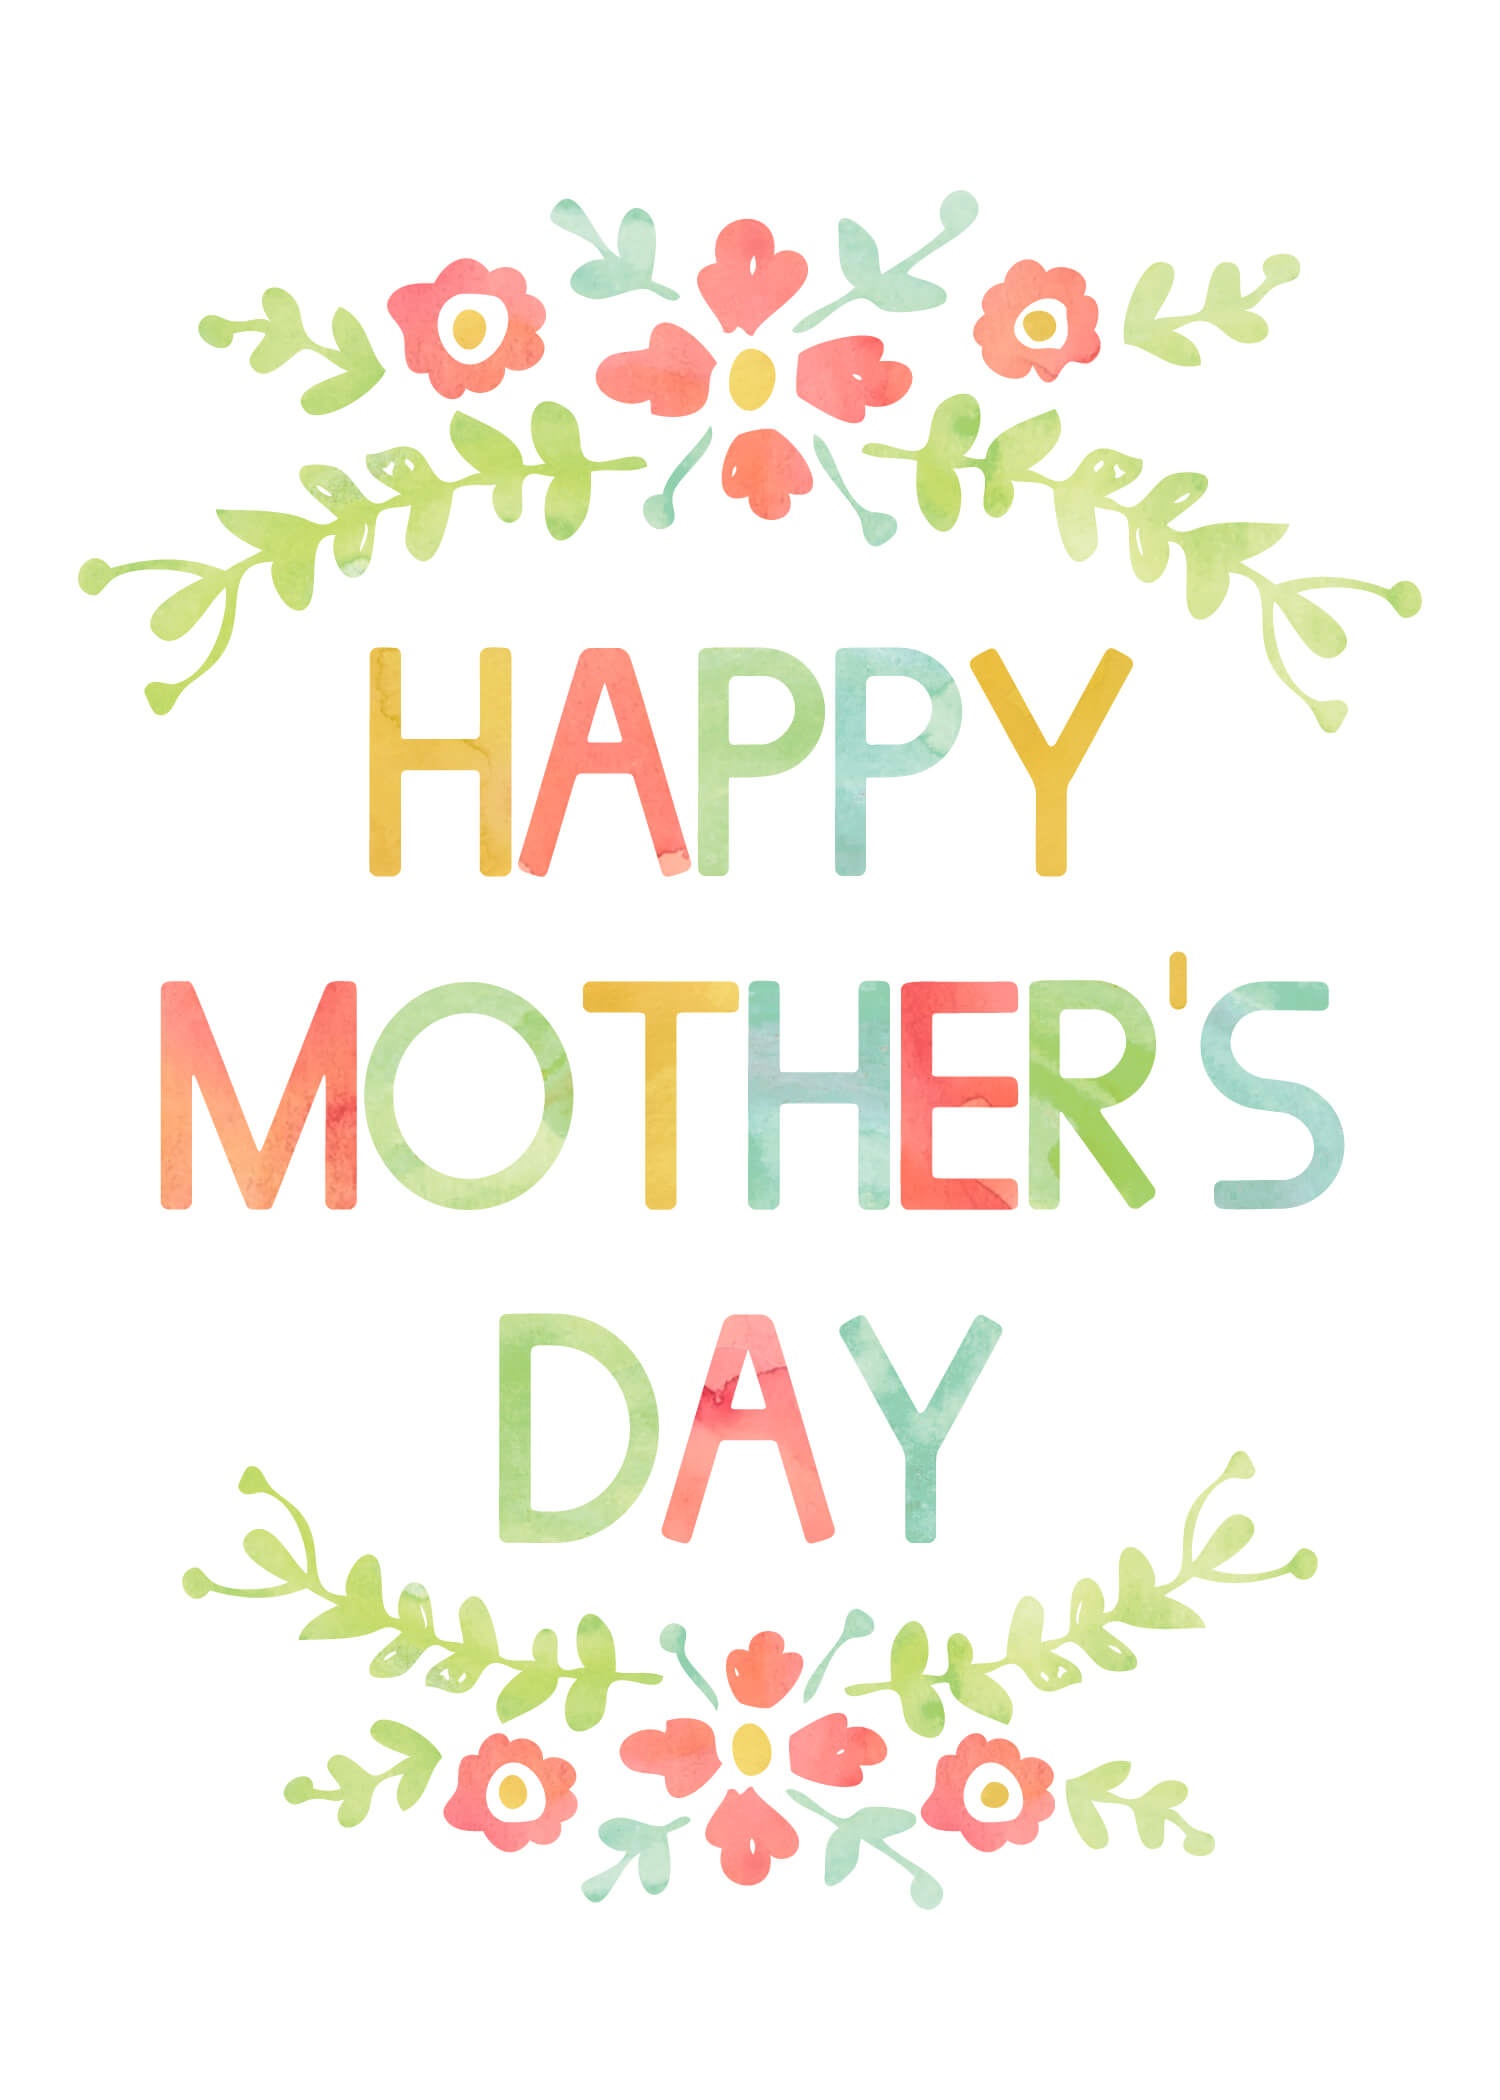 Mother&amp;#039;s Day Card - Free Printable - Free Printable Mothers Day Cards